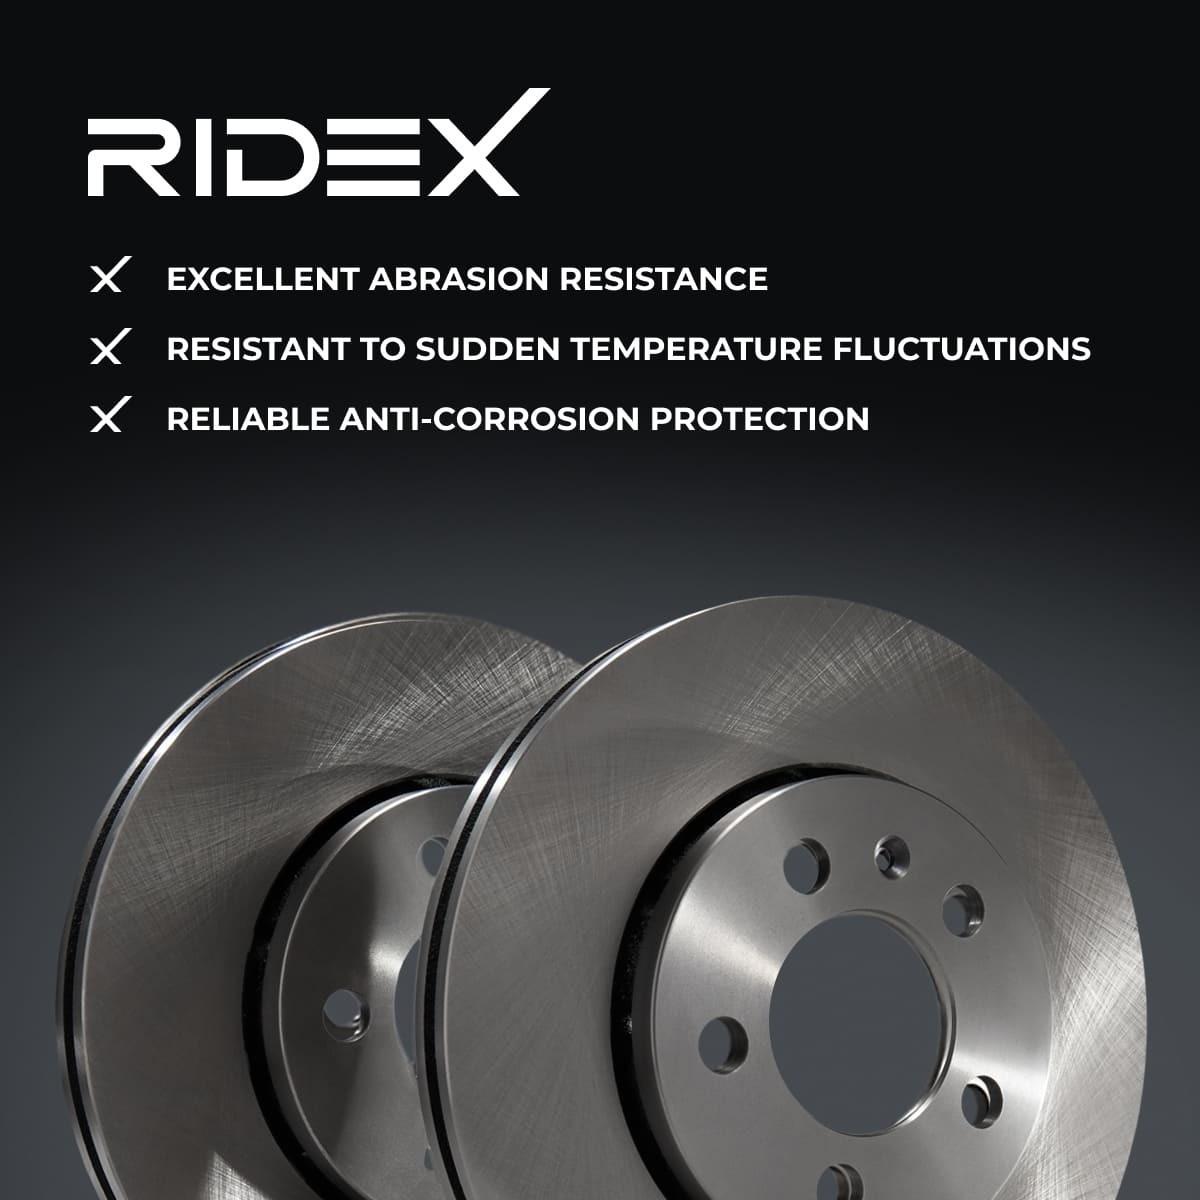 82B0010 Brake discs 82B0010 RIDEX Front Axle, 286x22mm, 5/6, internally vented, Uncoated